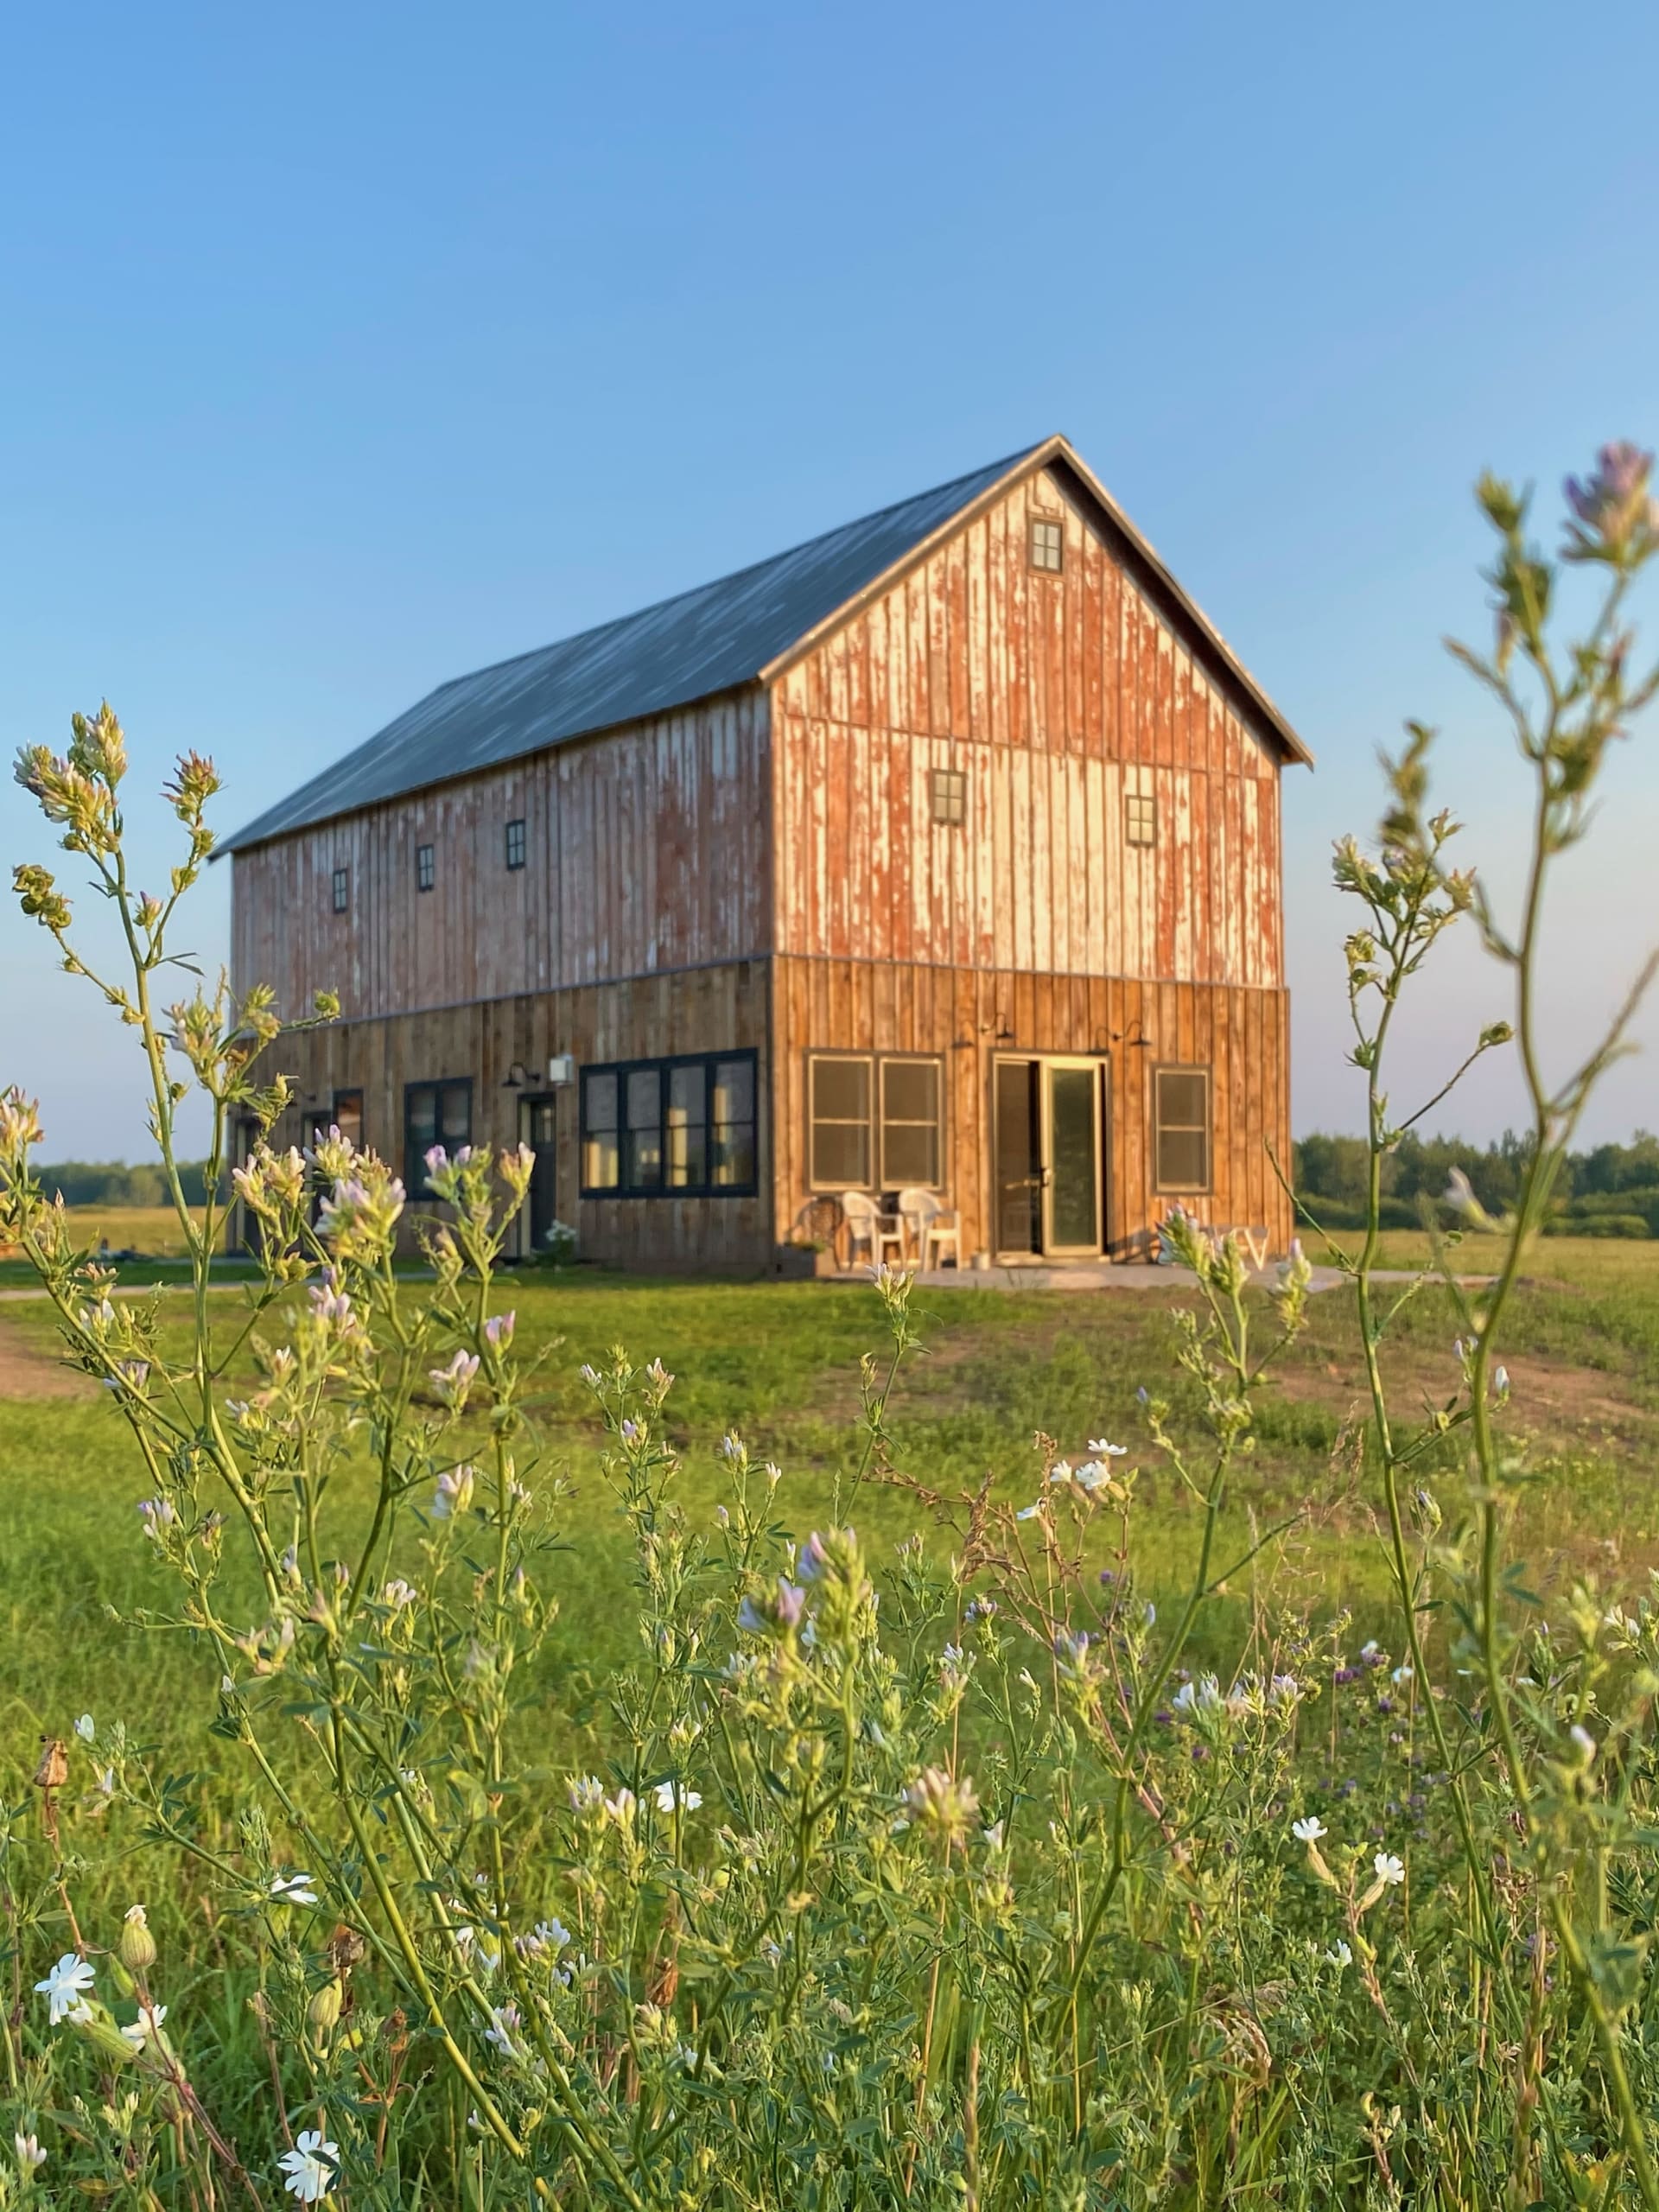 The Timber Frame Barn Stay is in the center of the farm and has a patio overlooking the pond.